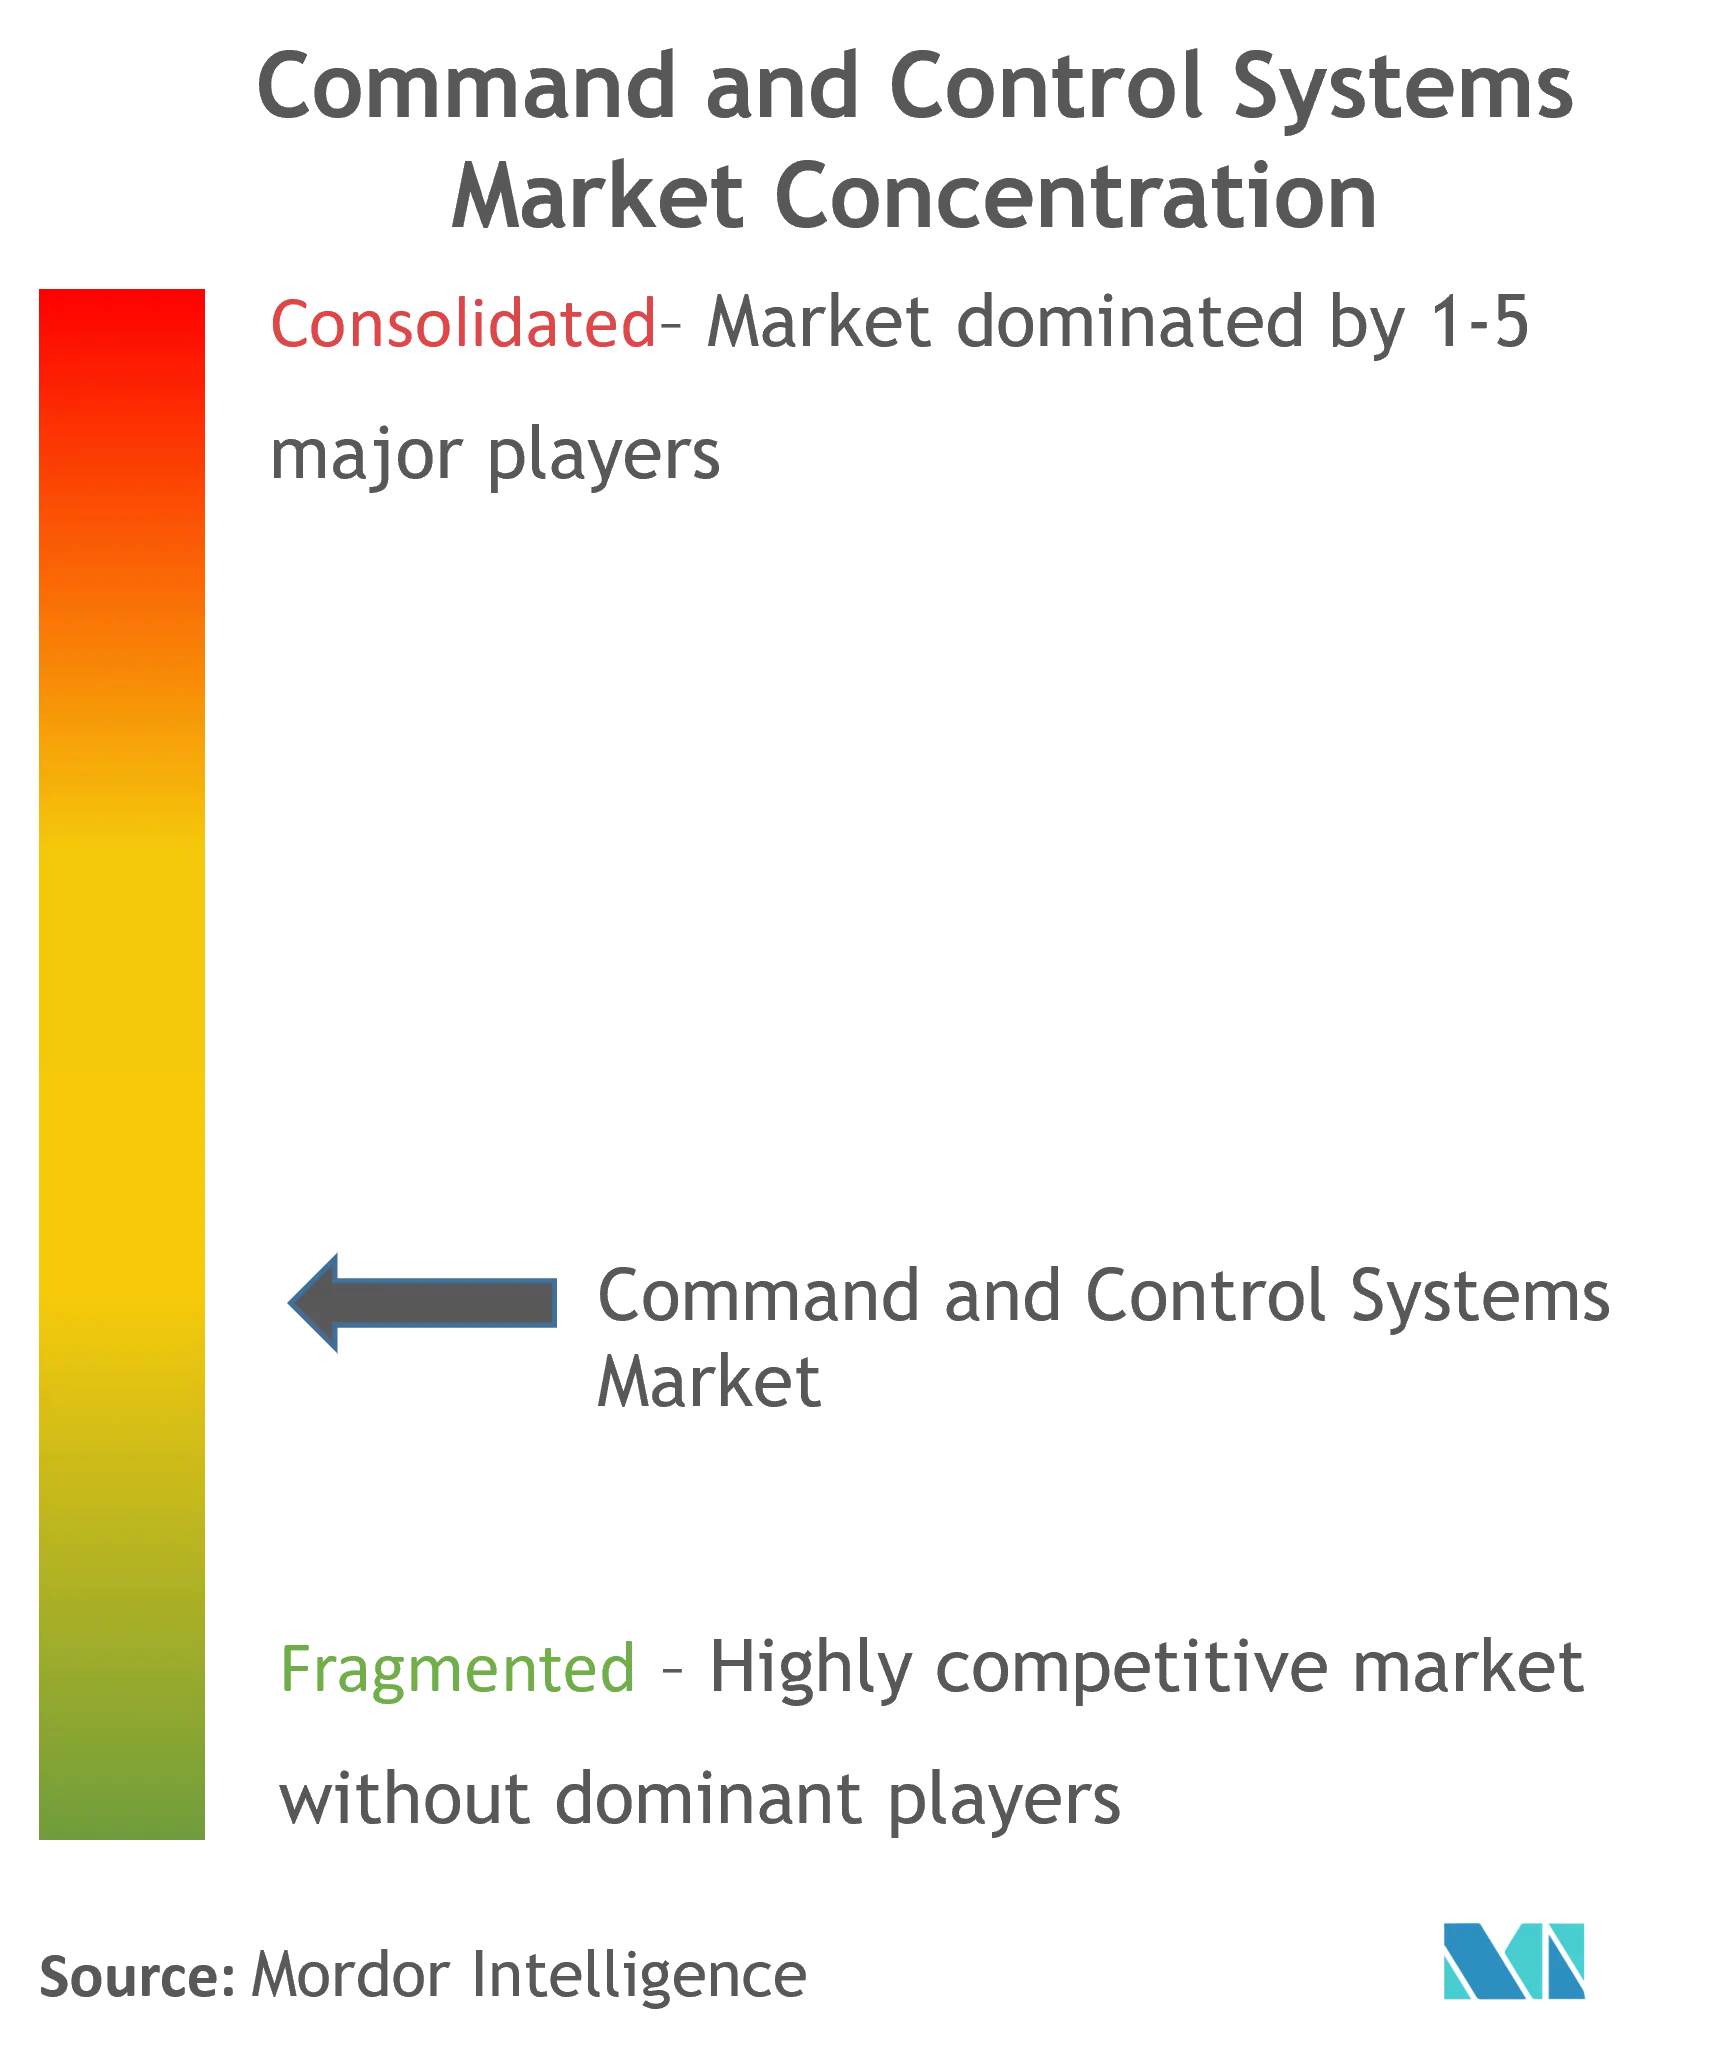 Command and Control Systems Market Concentration